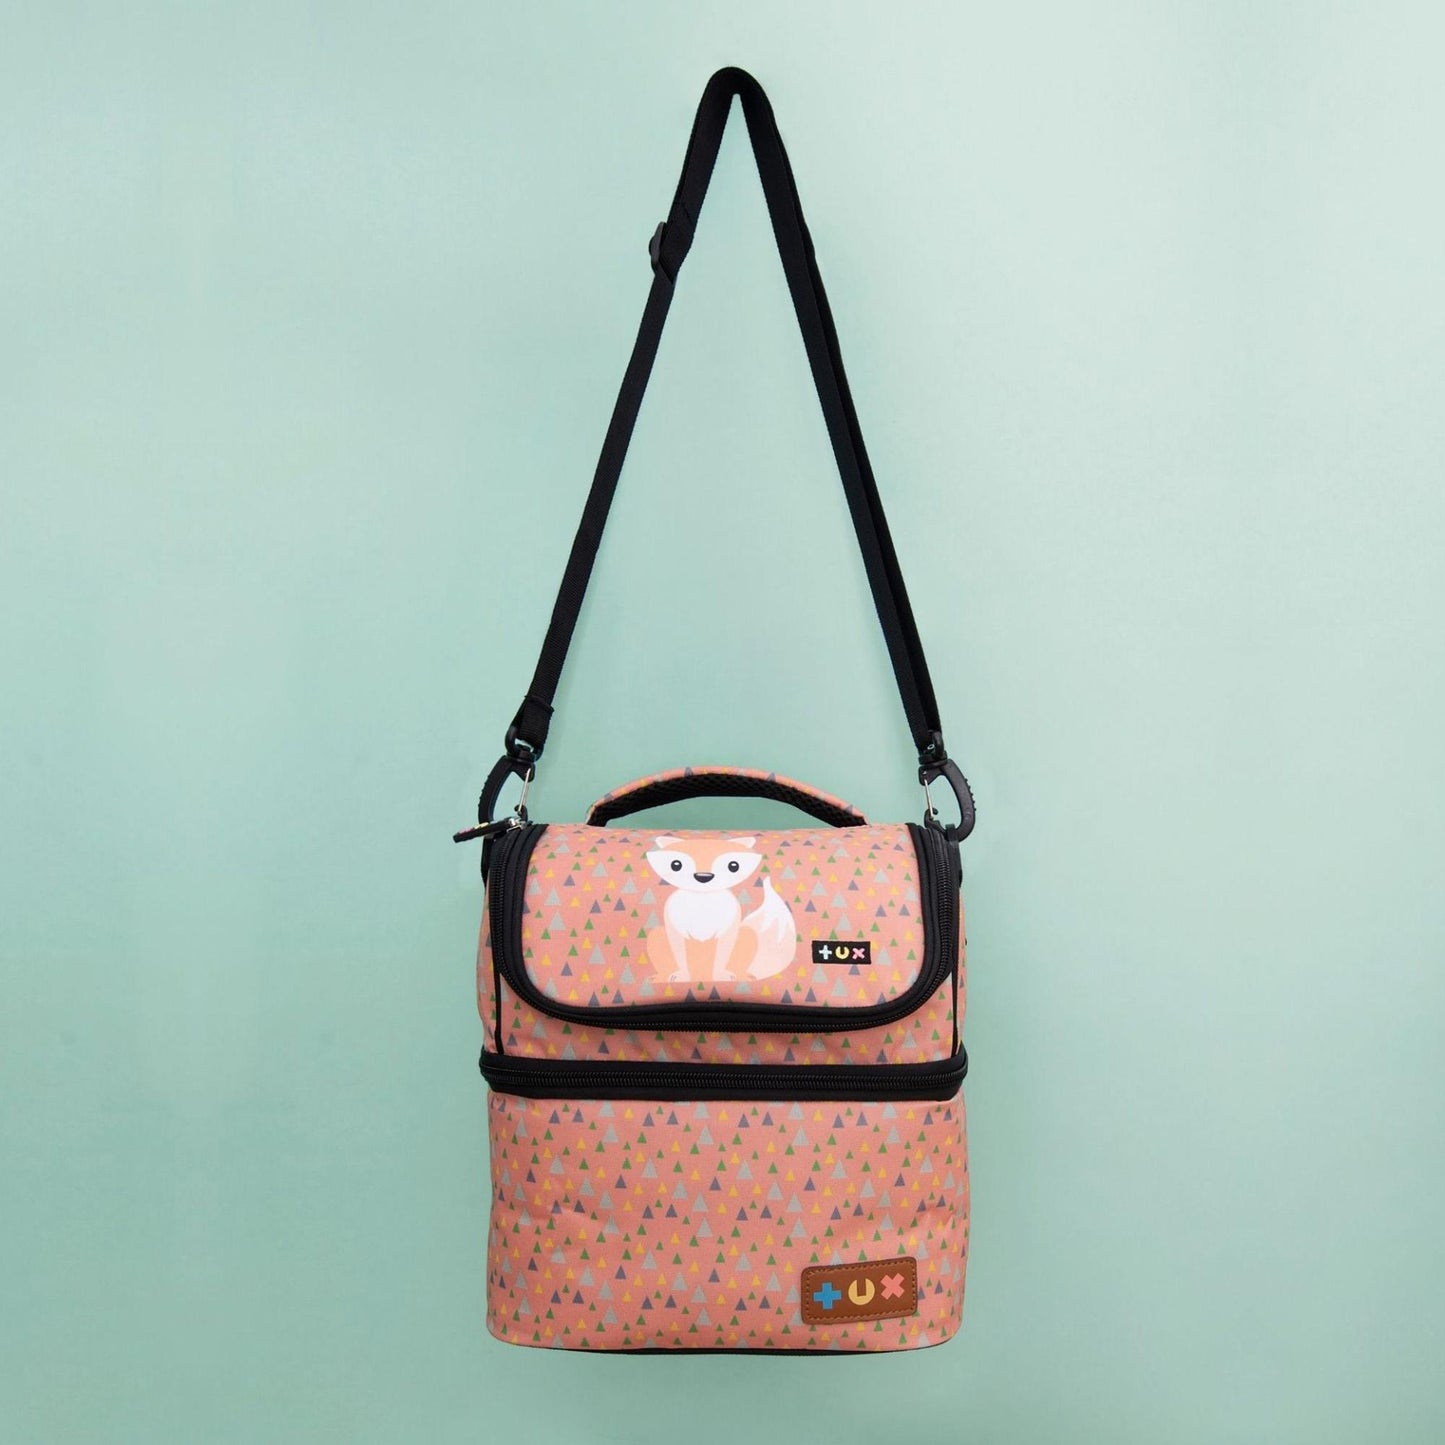 Tux bag "Safari Fox (L)" for up to 32 tonies including accessories and Toniebox, fox